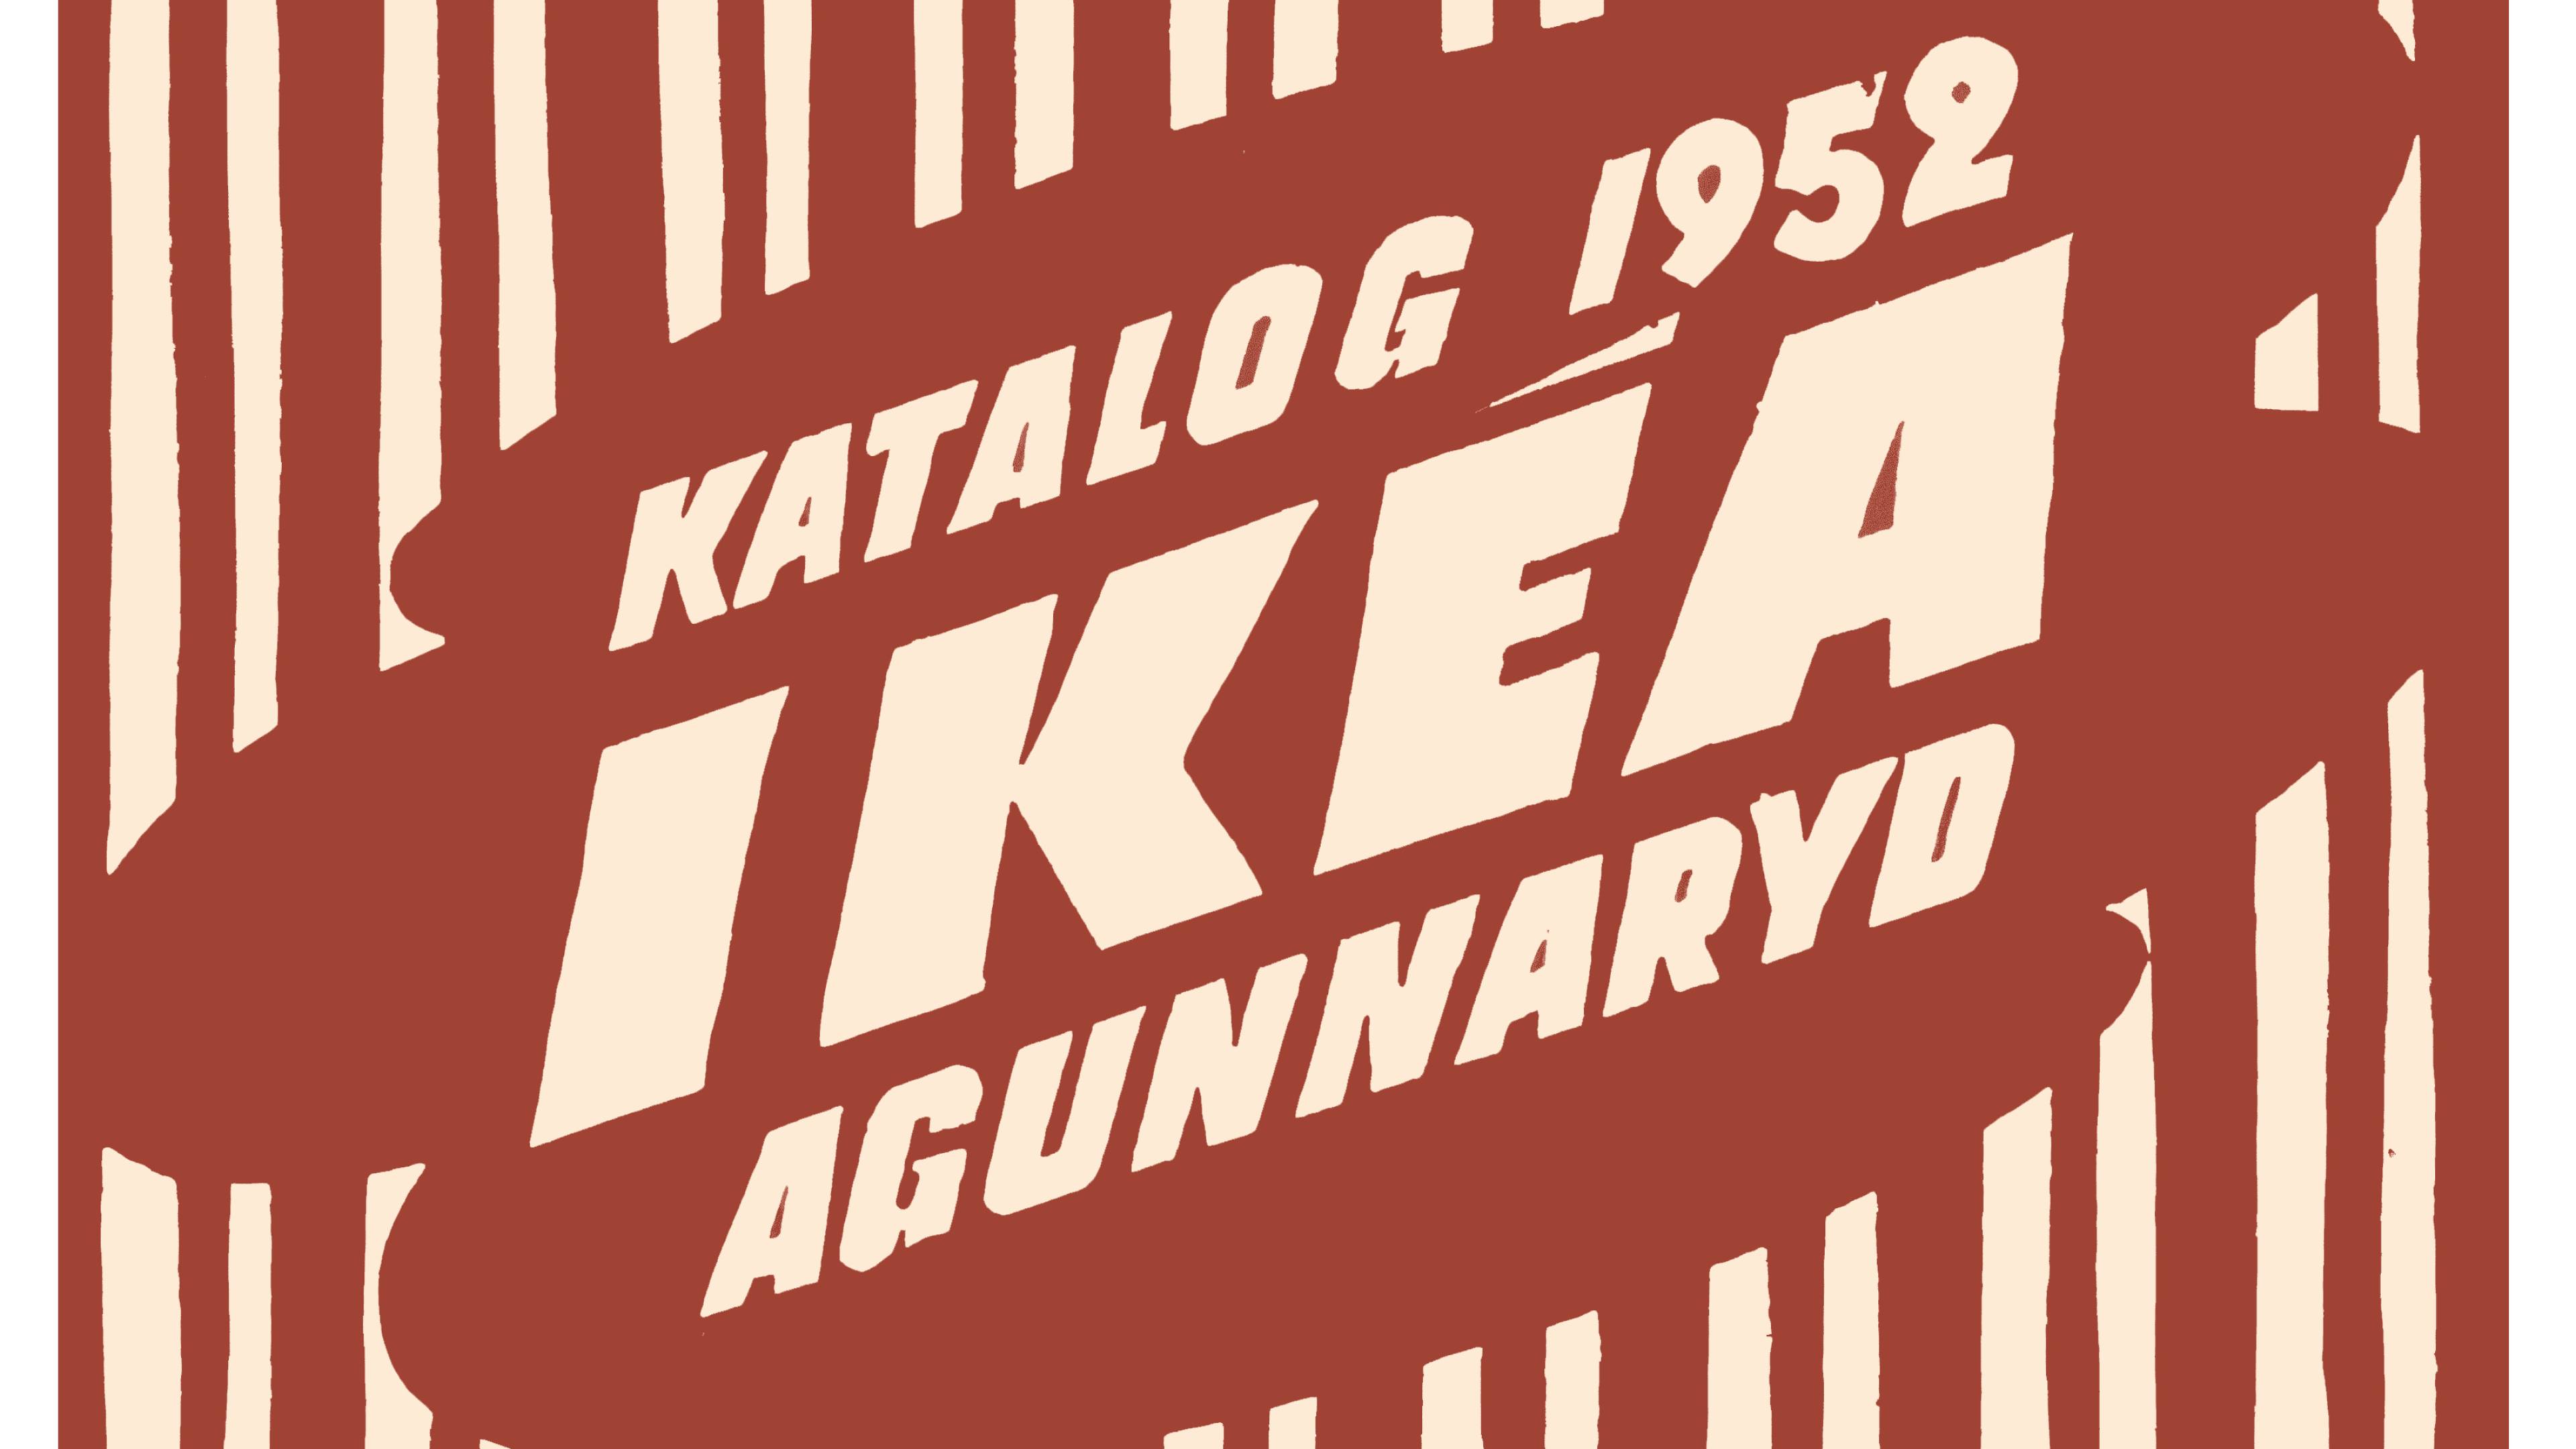 Ikea: One of the best-known home furniture companies in the world, 1951-1952 logo. 3840x2160 4K Background.